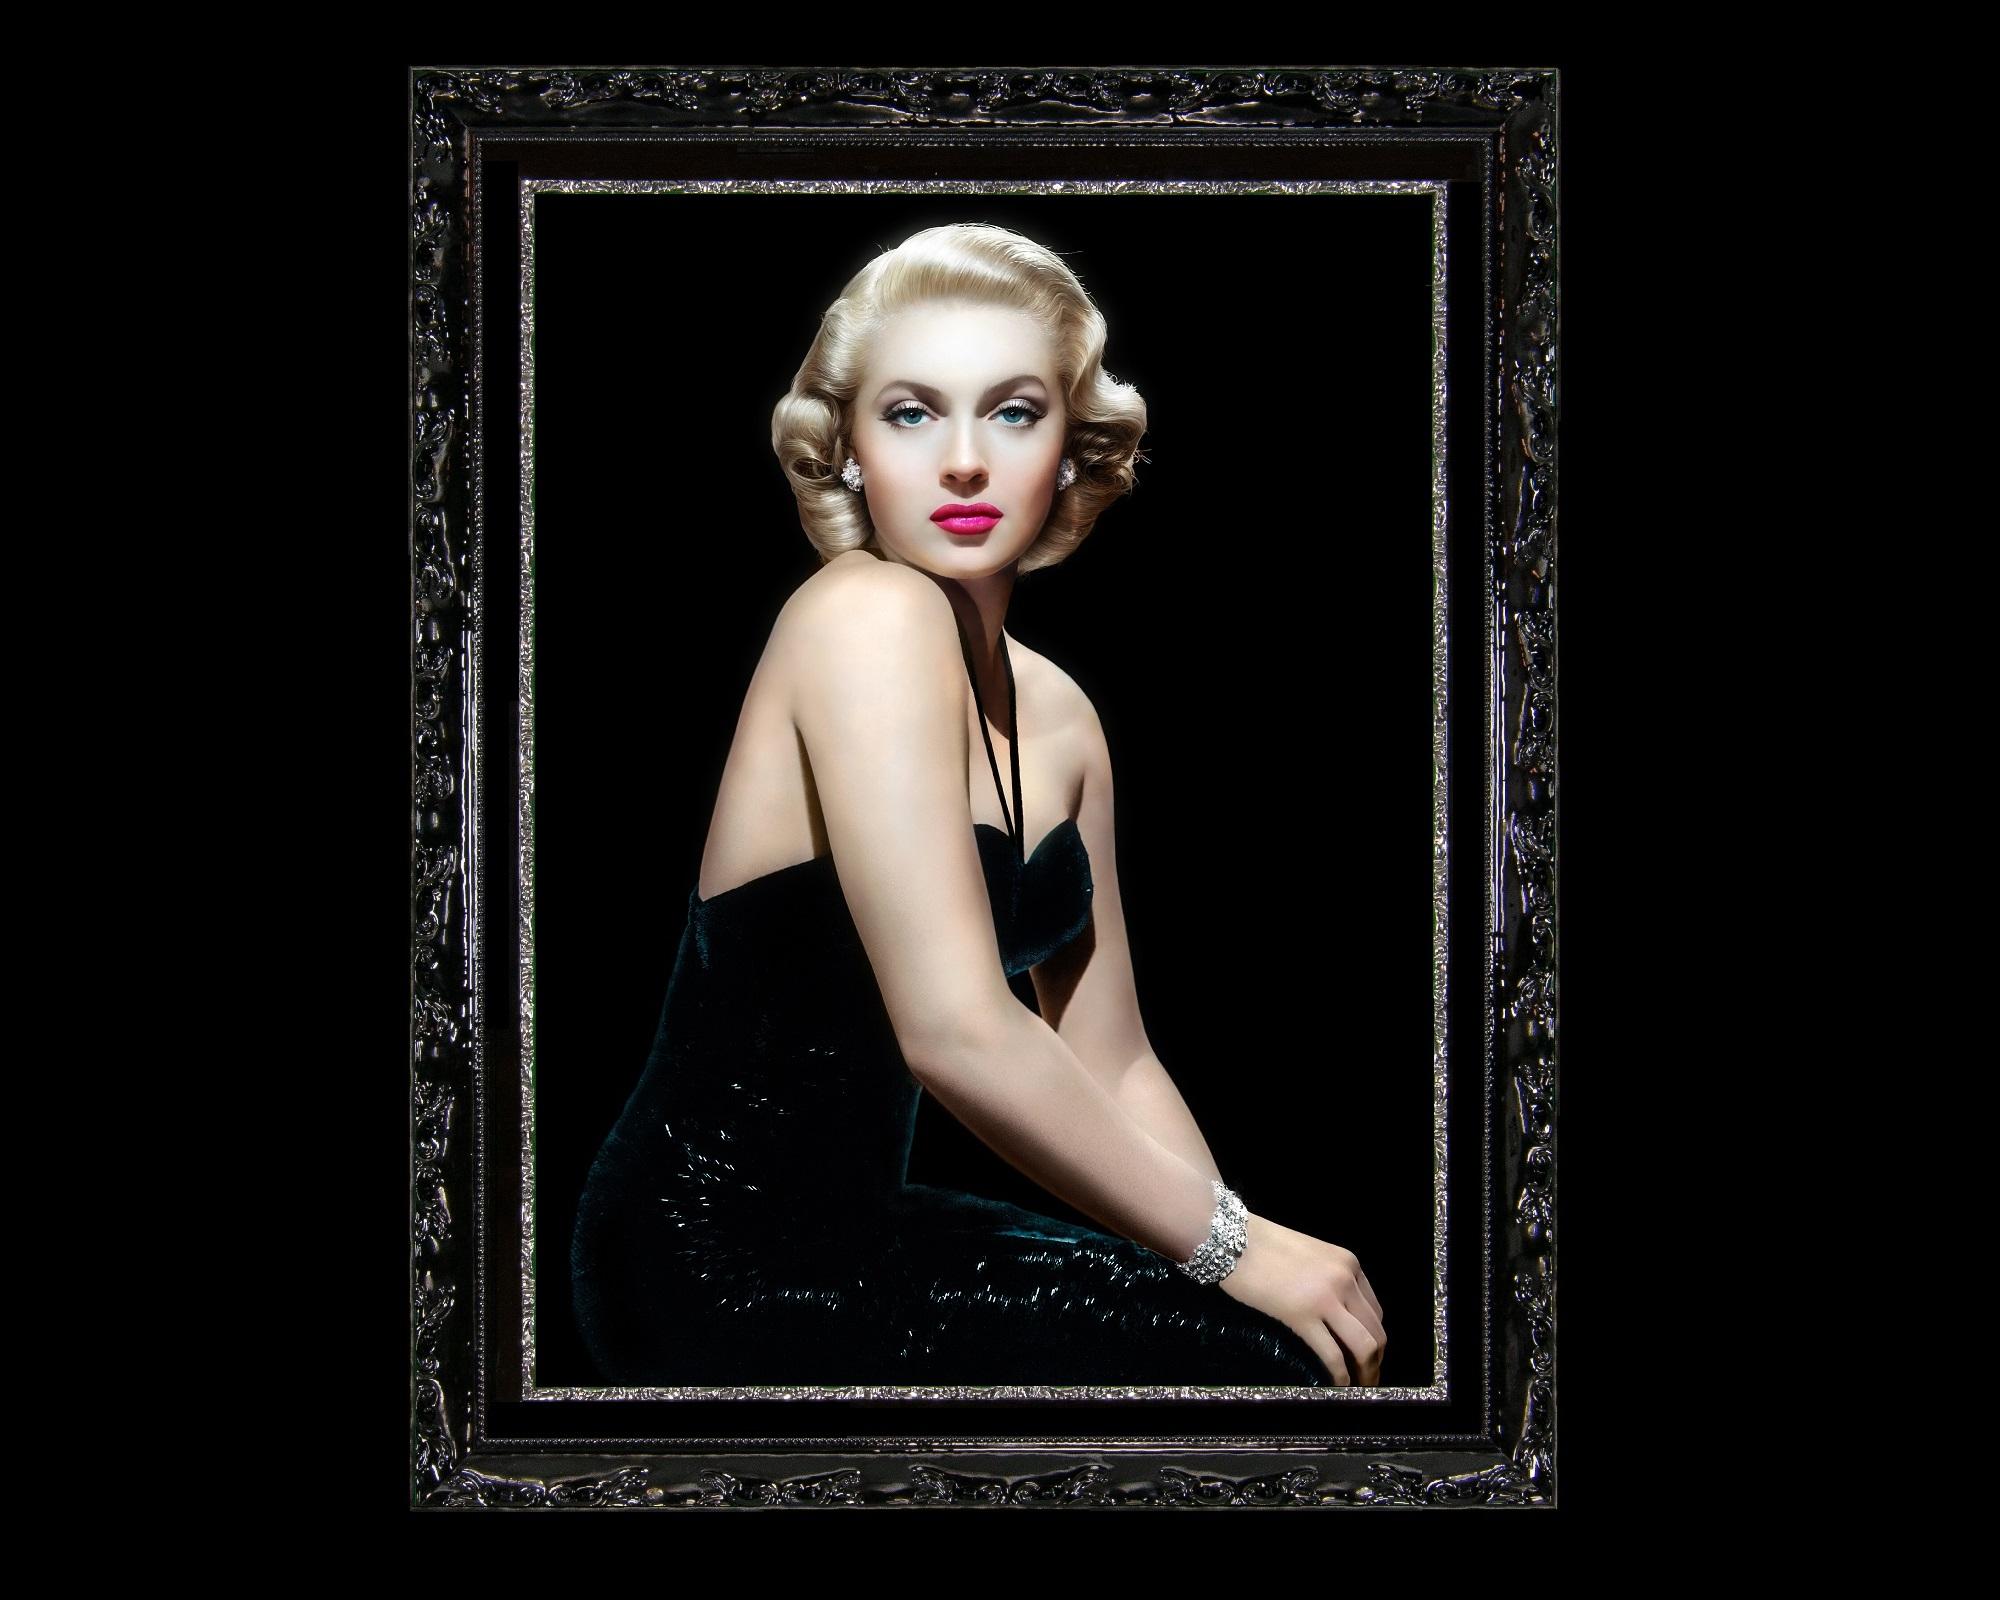 This large American Realist Photo is a faithful yet nuanced reproduction portrait of the 1940s Sex Symbol 